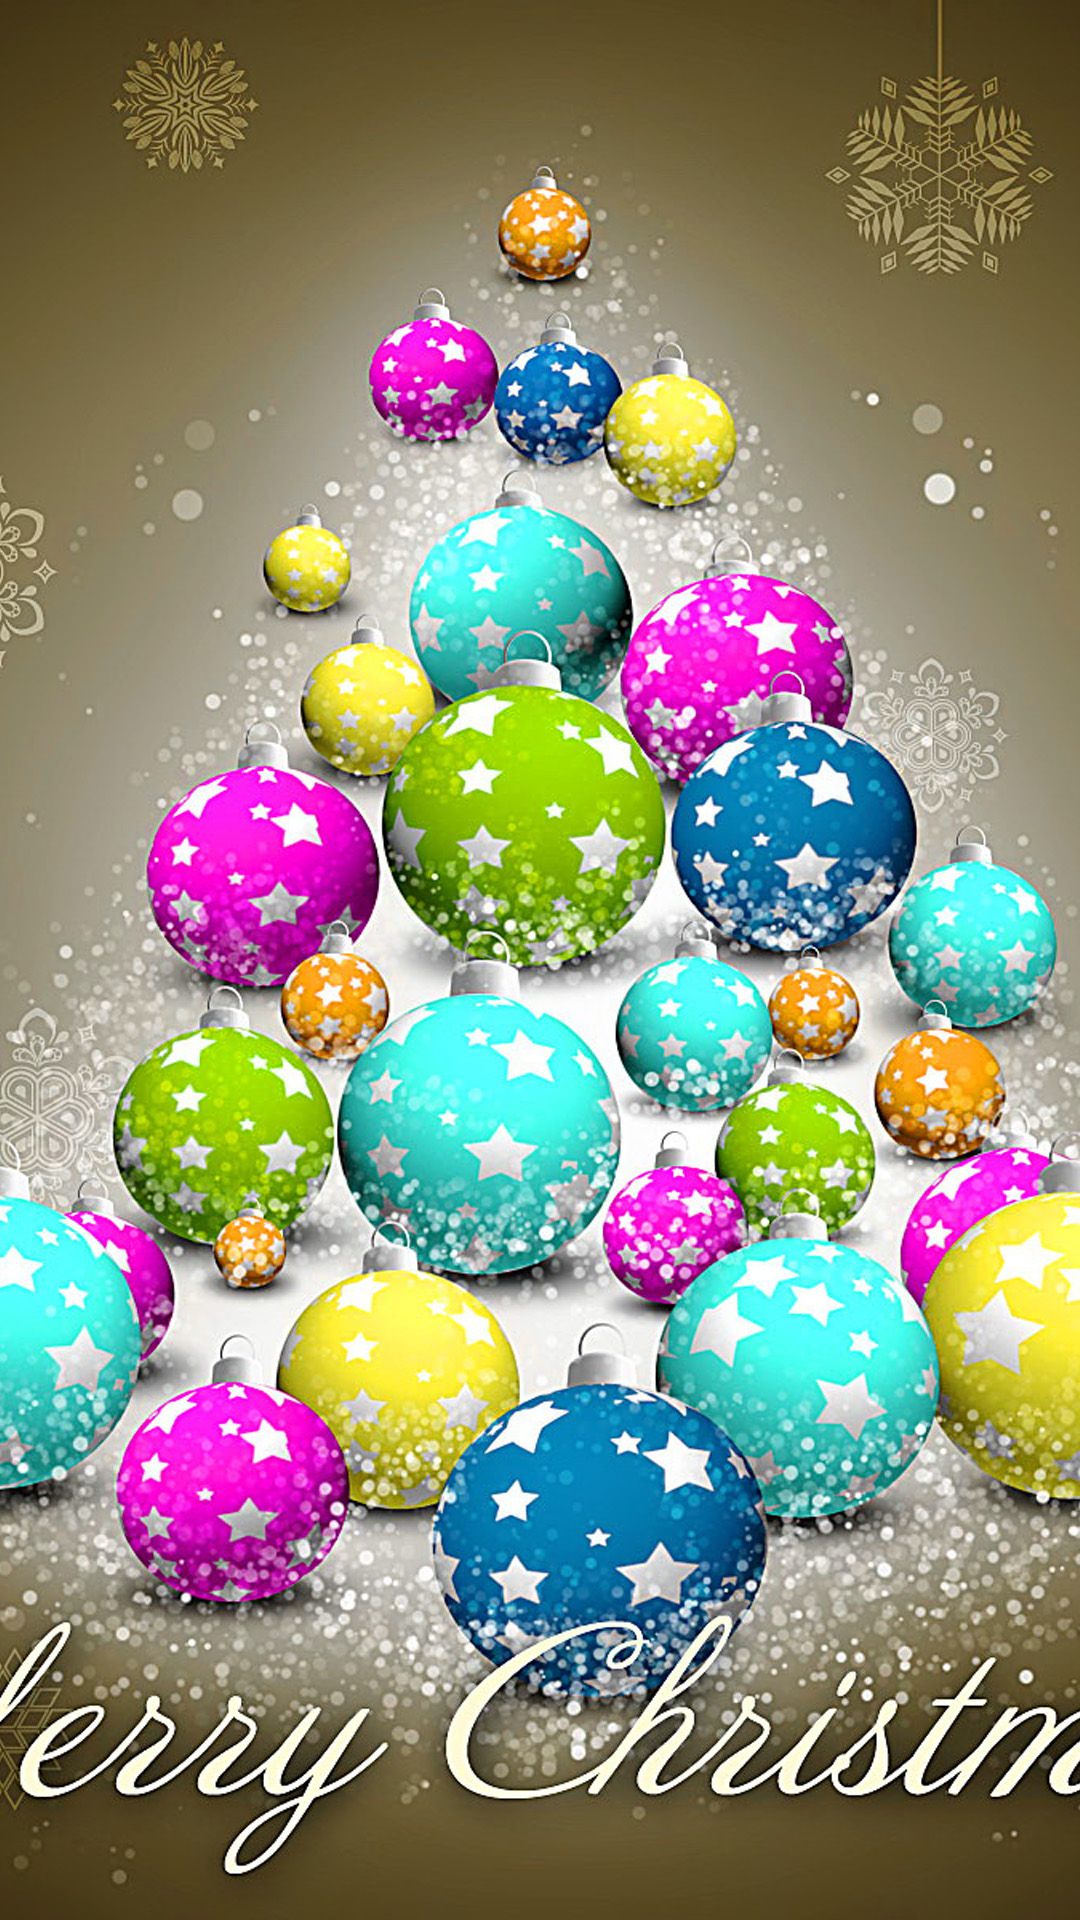 Colorful Merry Christmas Android wallpaper HD wallpaper